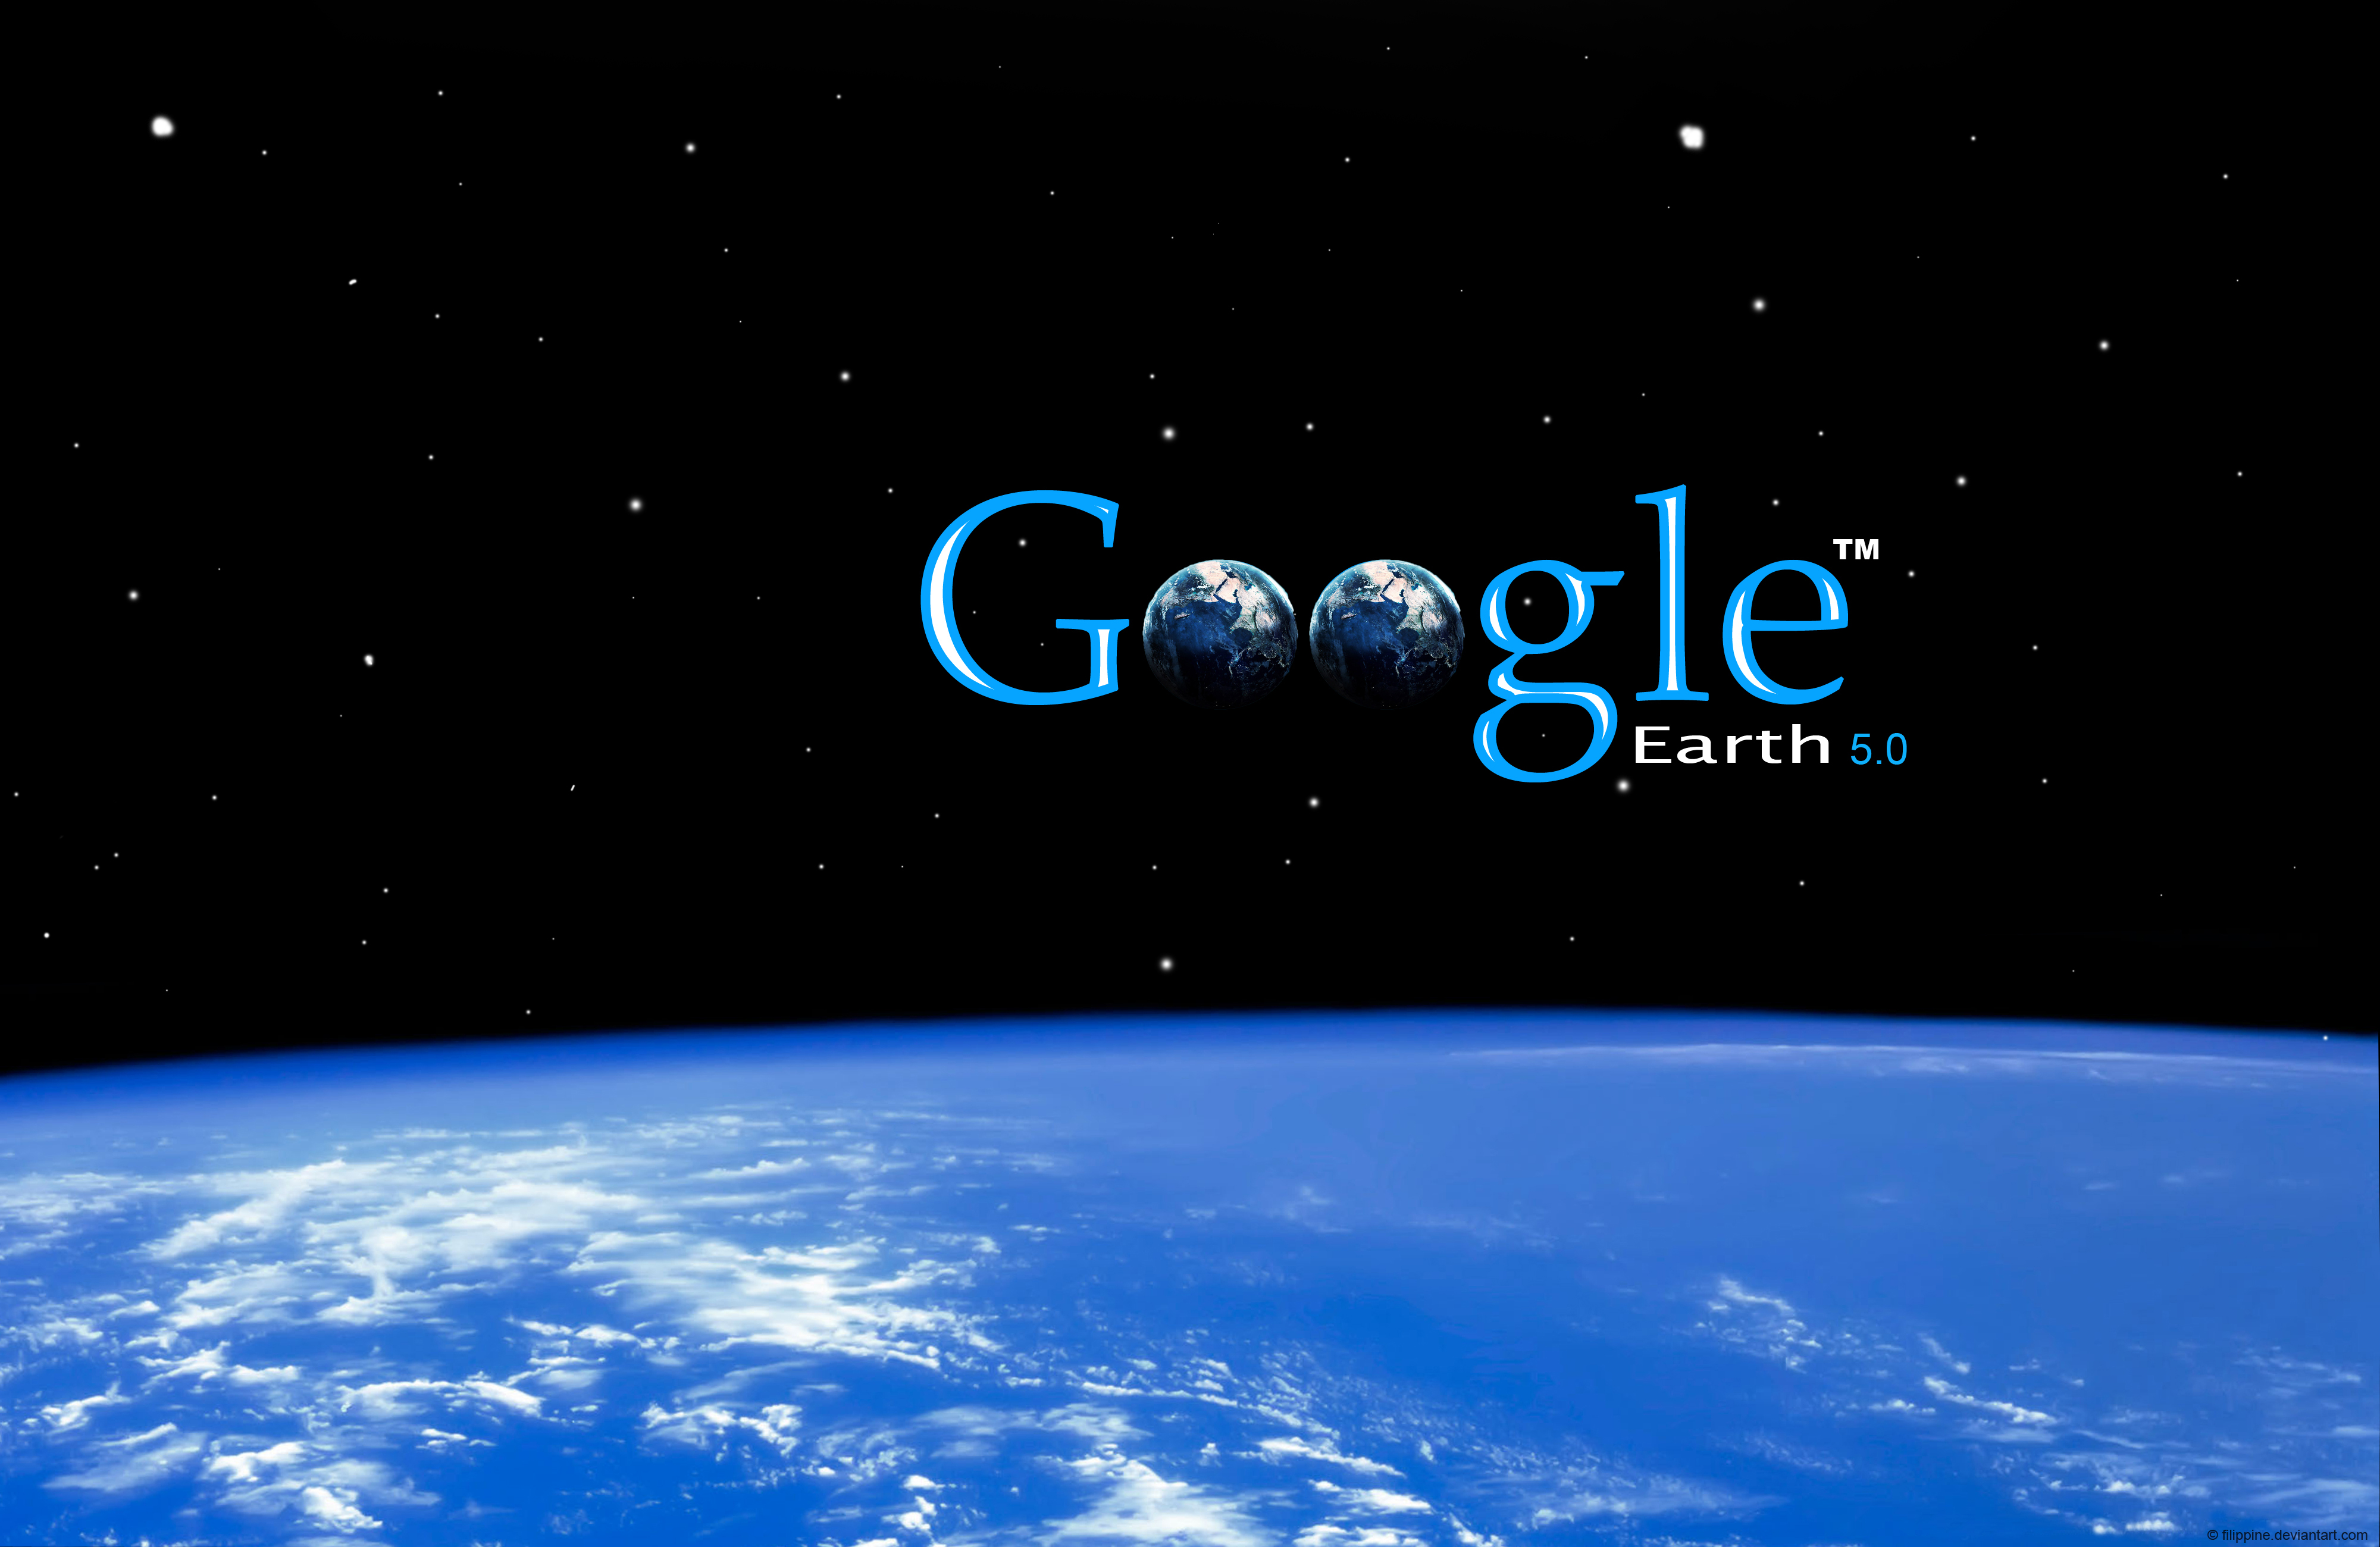 Google Maps, Earth, Outer Space background | Download Free images